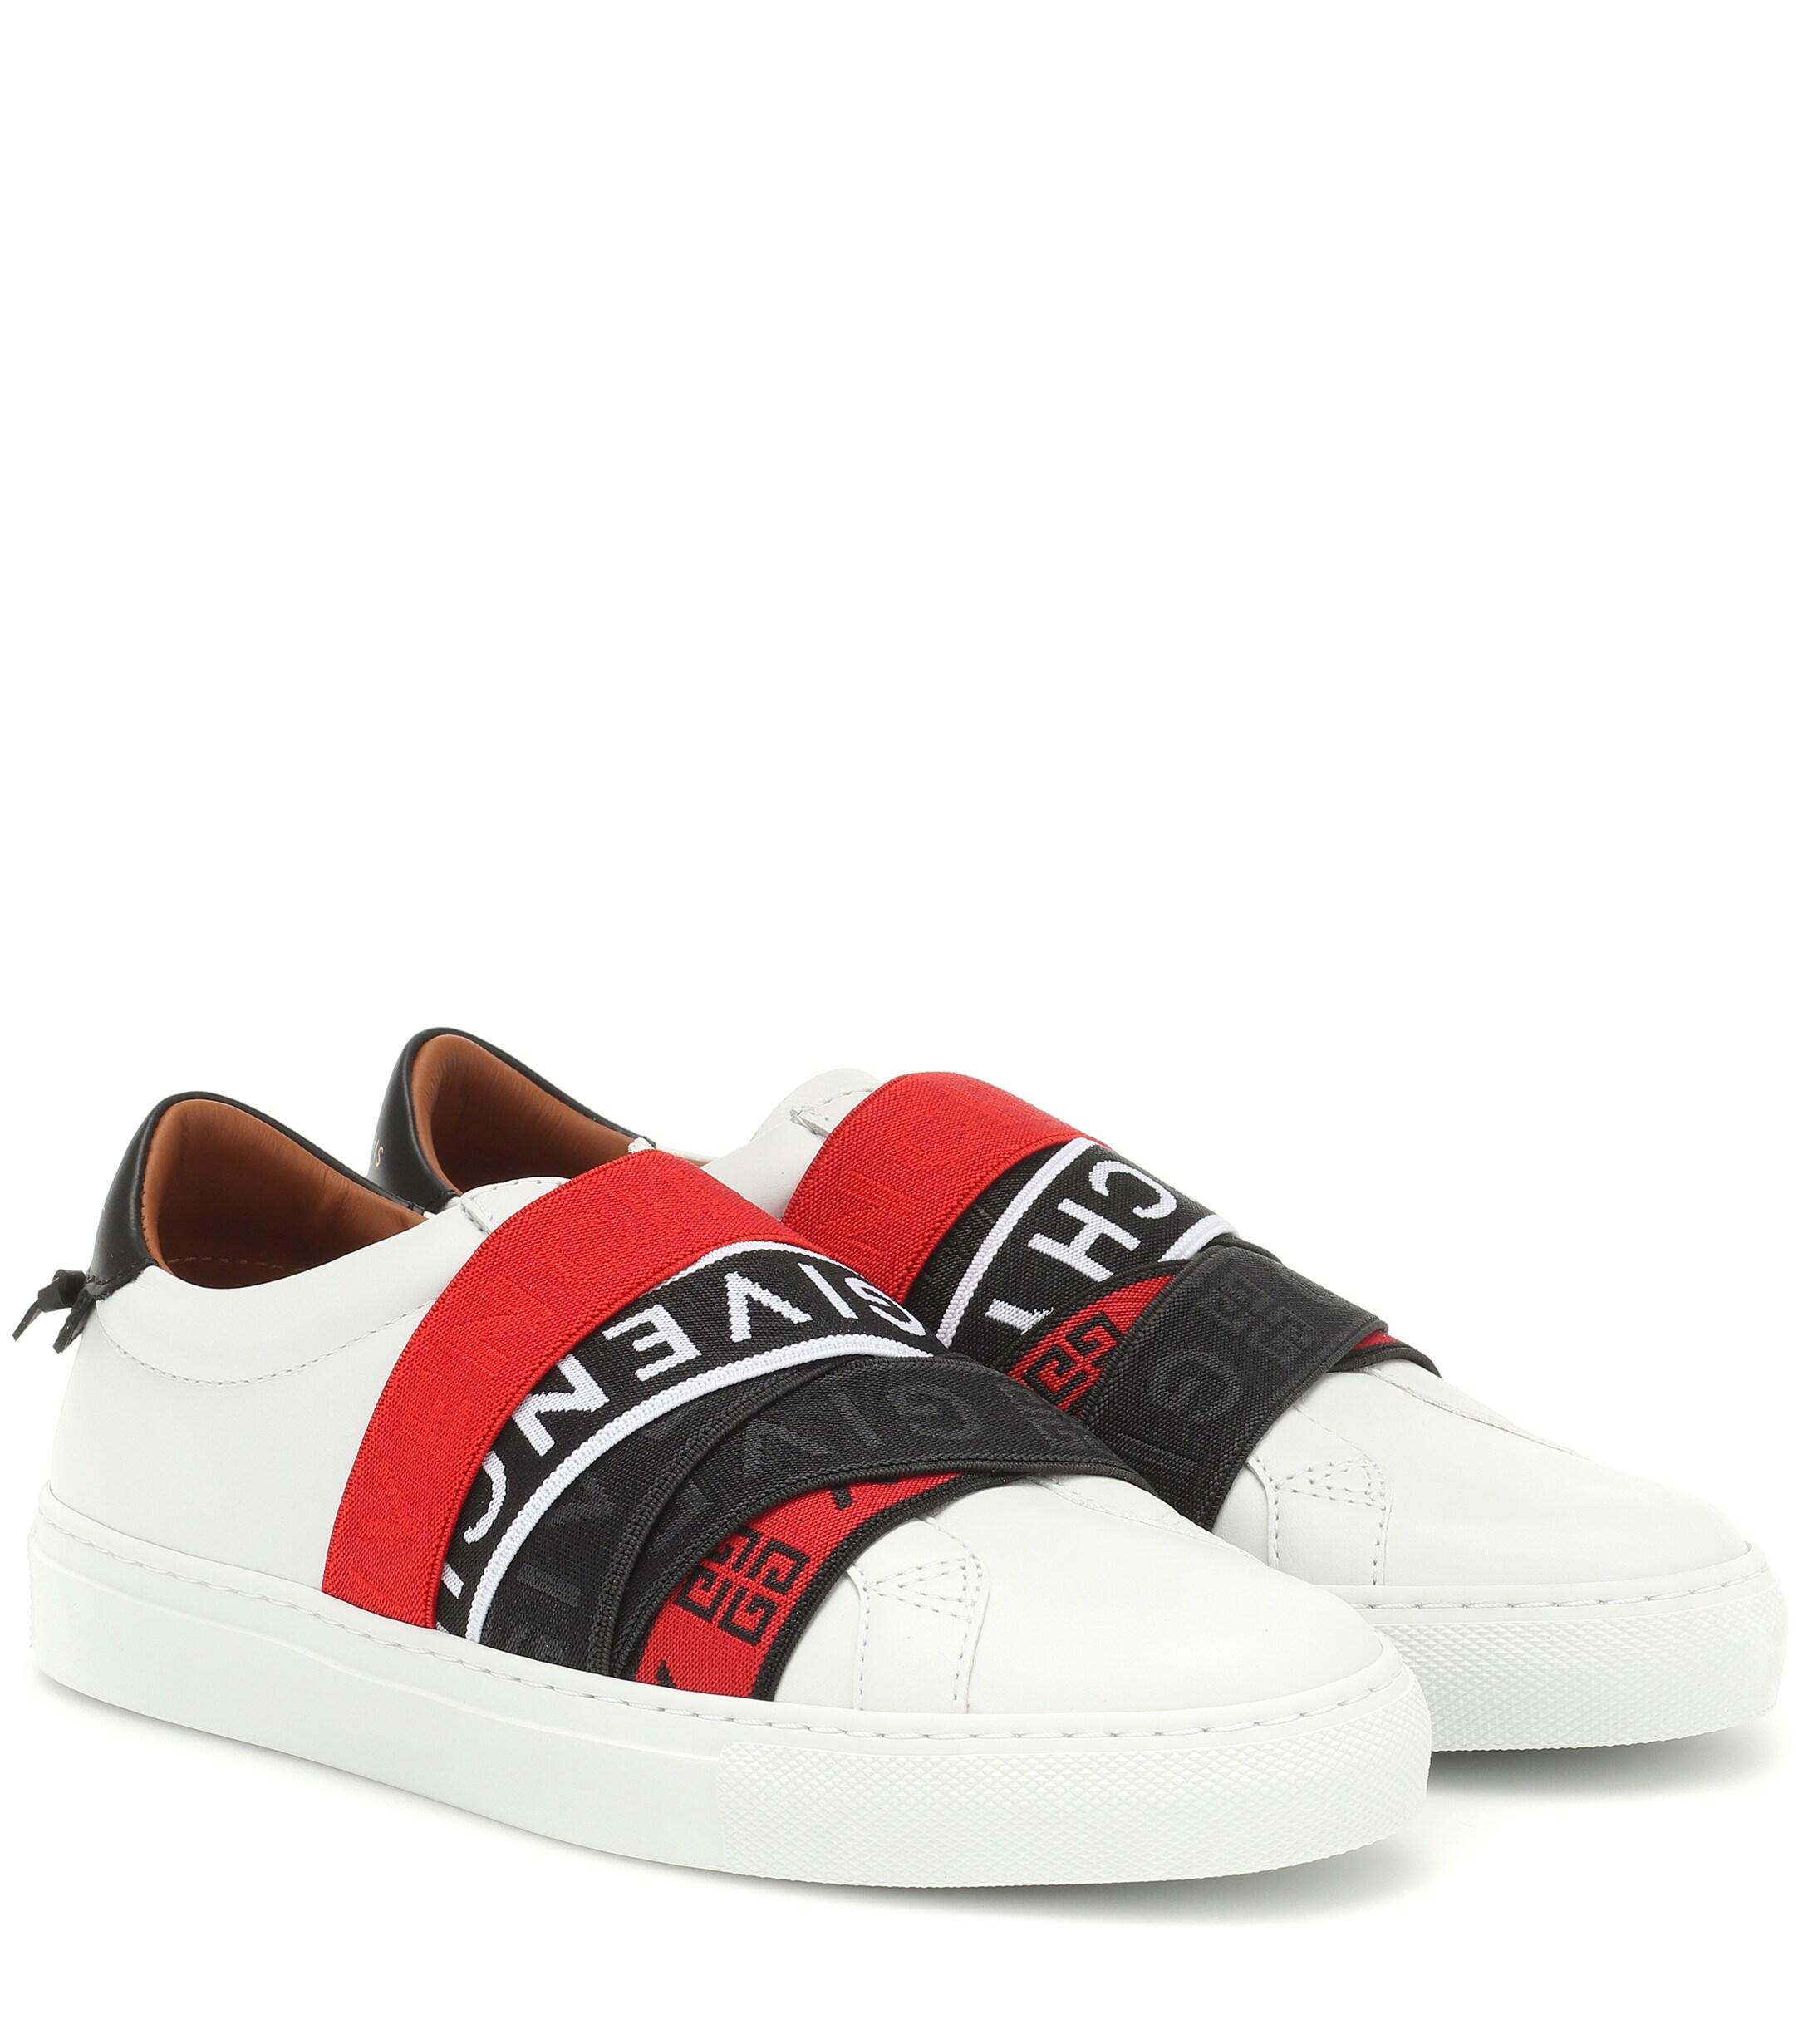 Givenchy 4g Leather Sneakers in White - Lyst